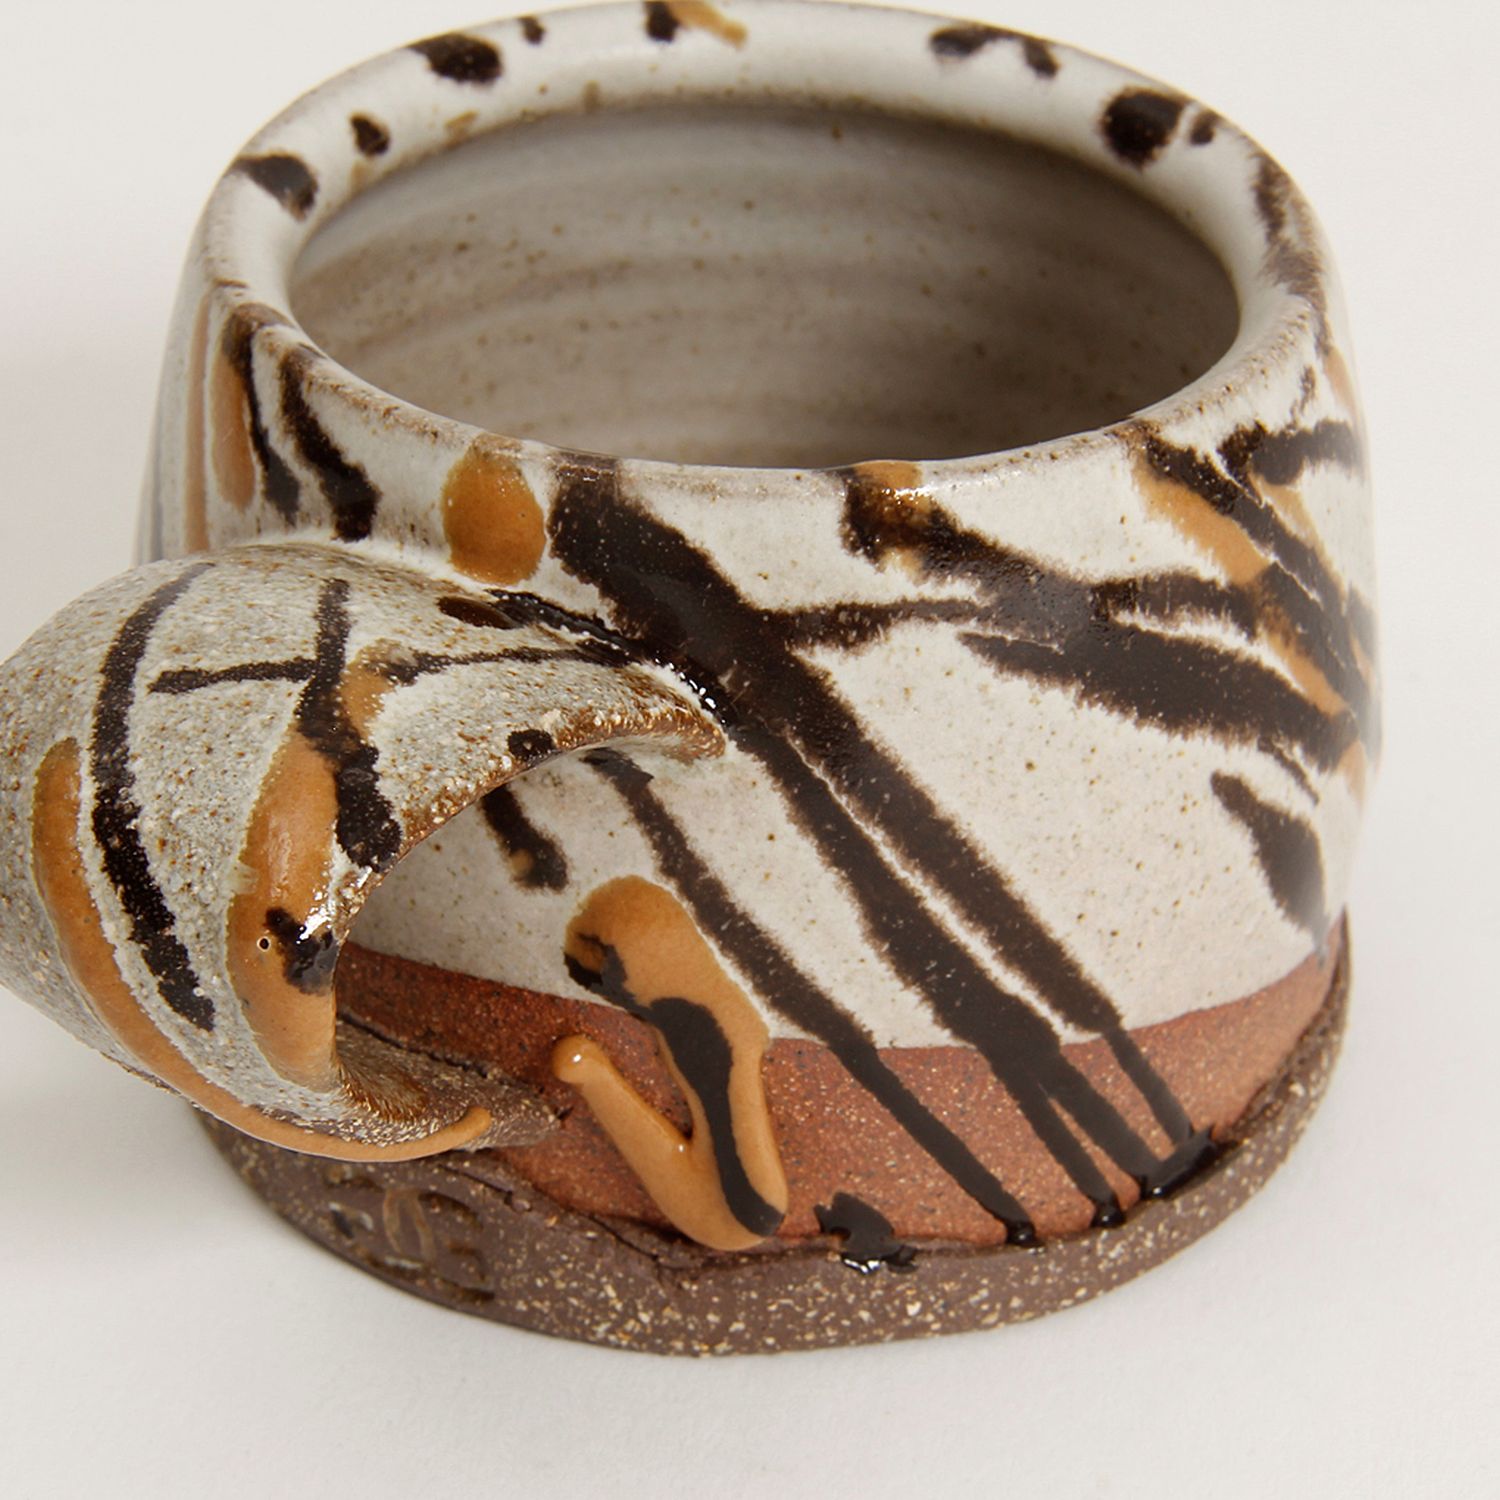 Gracia Isabel Gomez: Espresso mug in Brown Chocolate Product Image 5 of 6